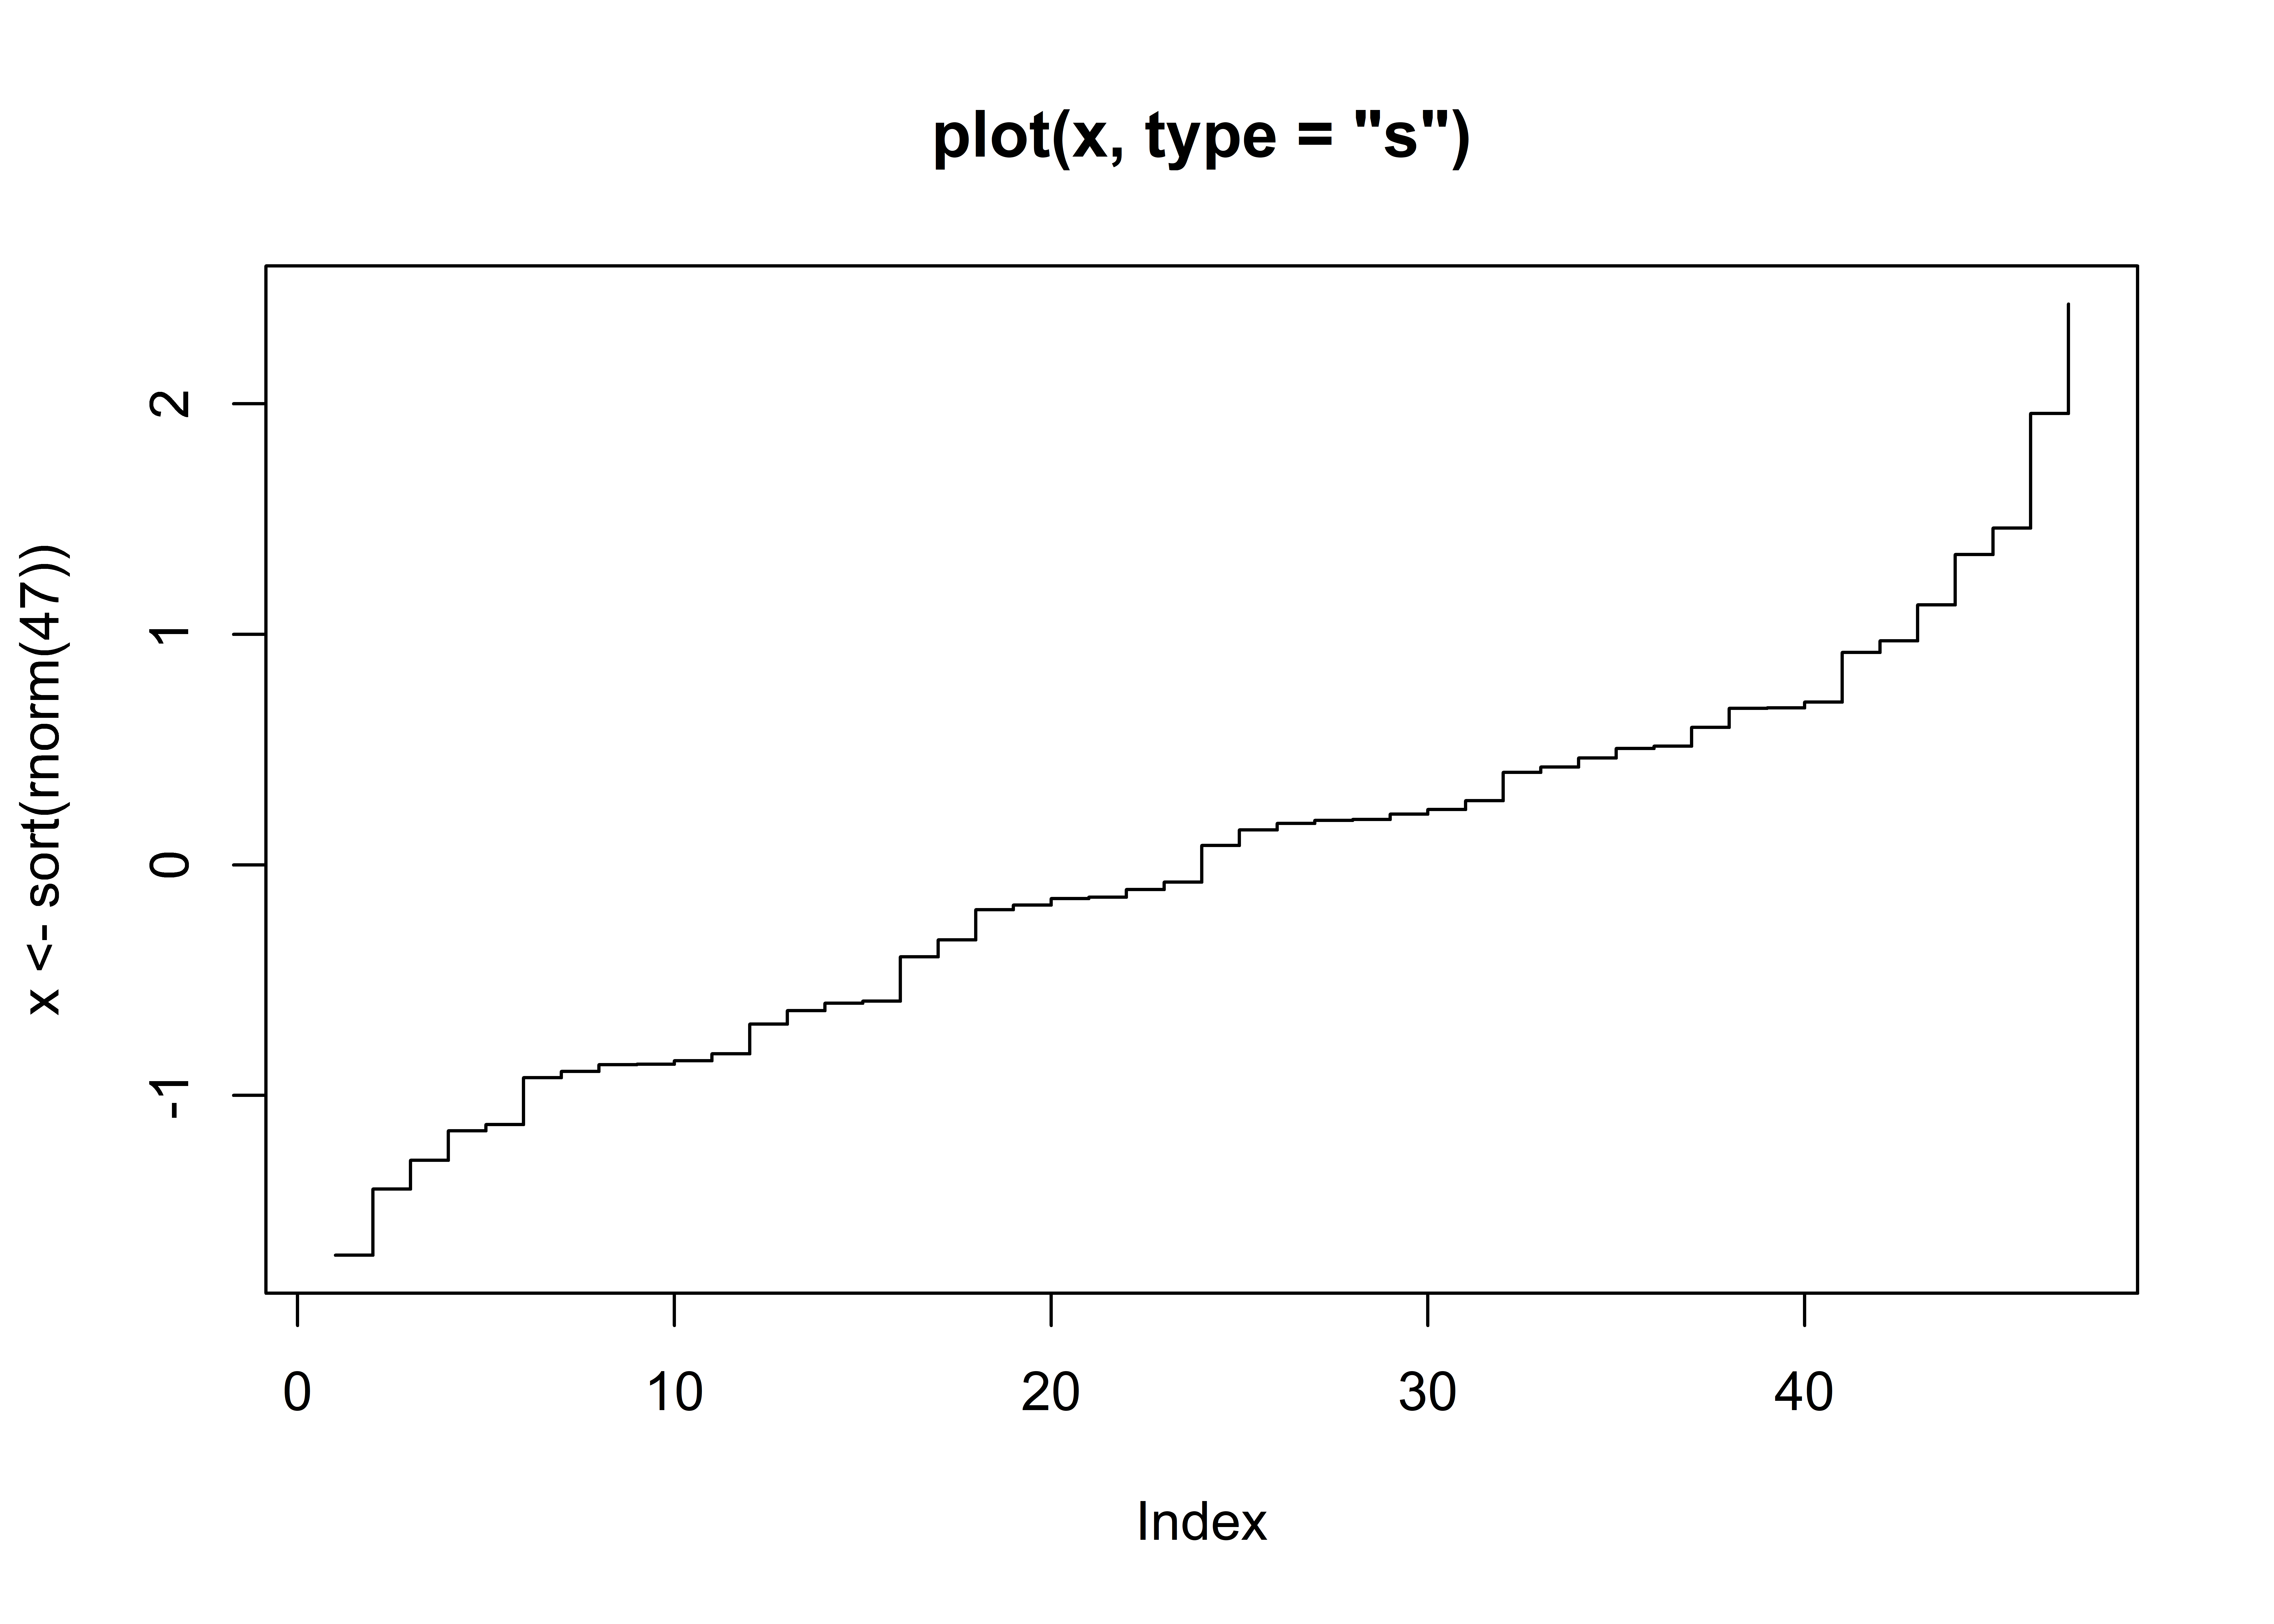 Plot generated by R's plot function.